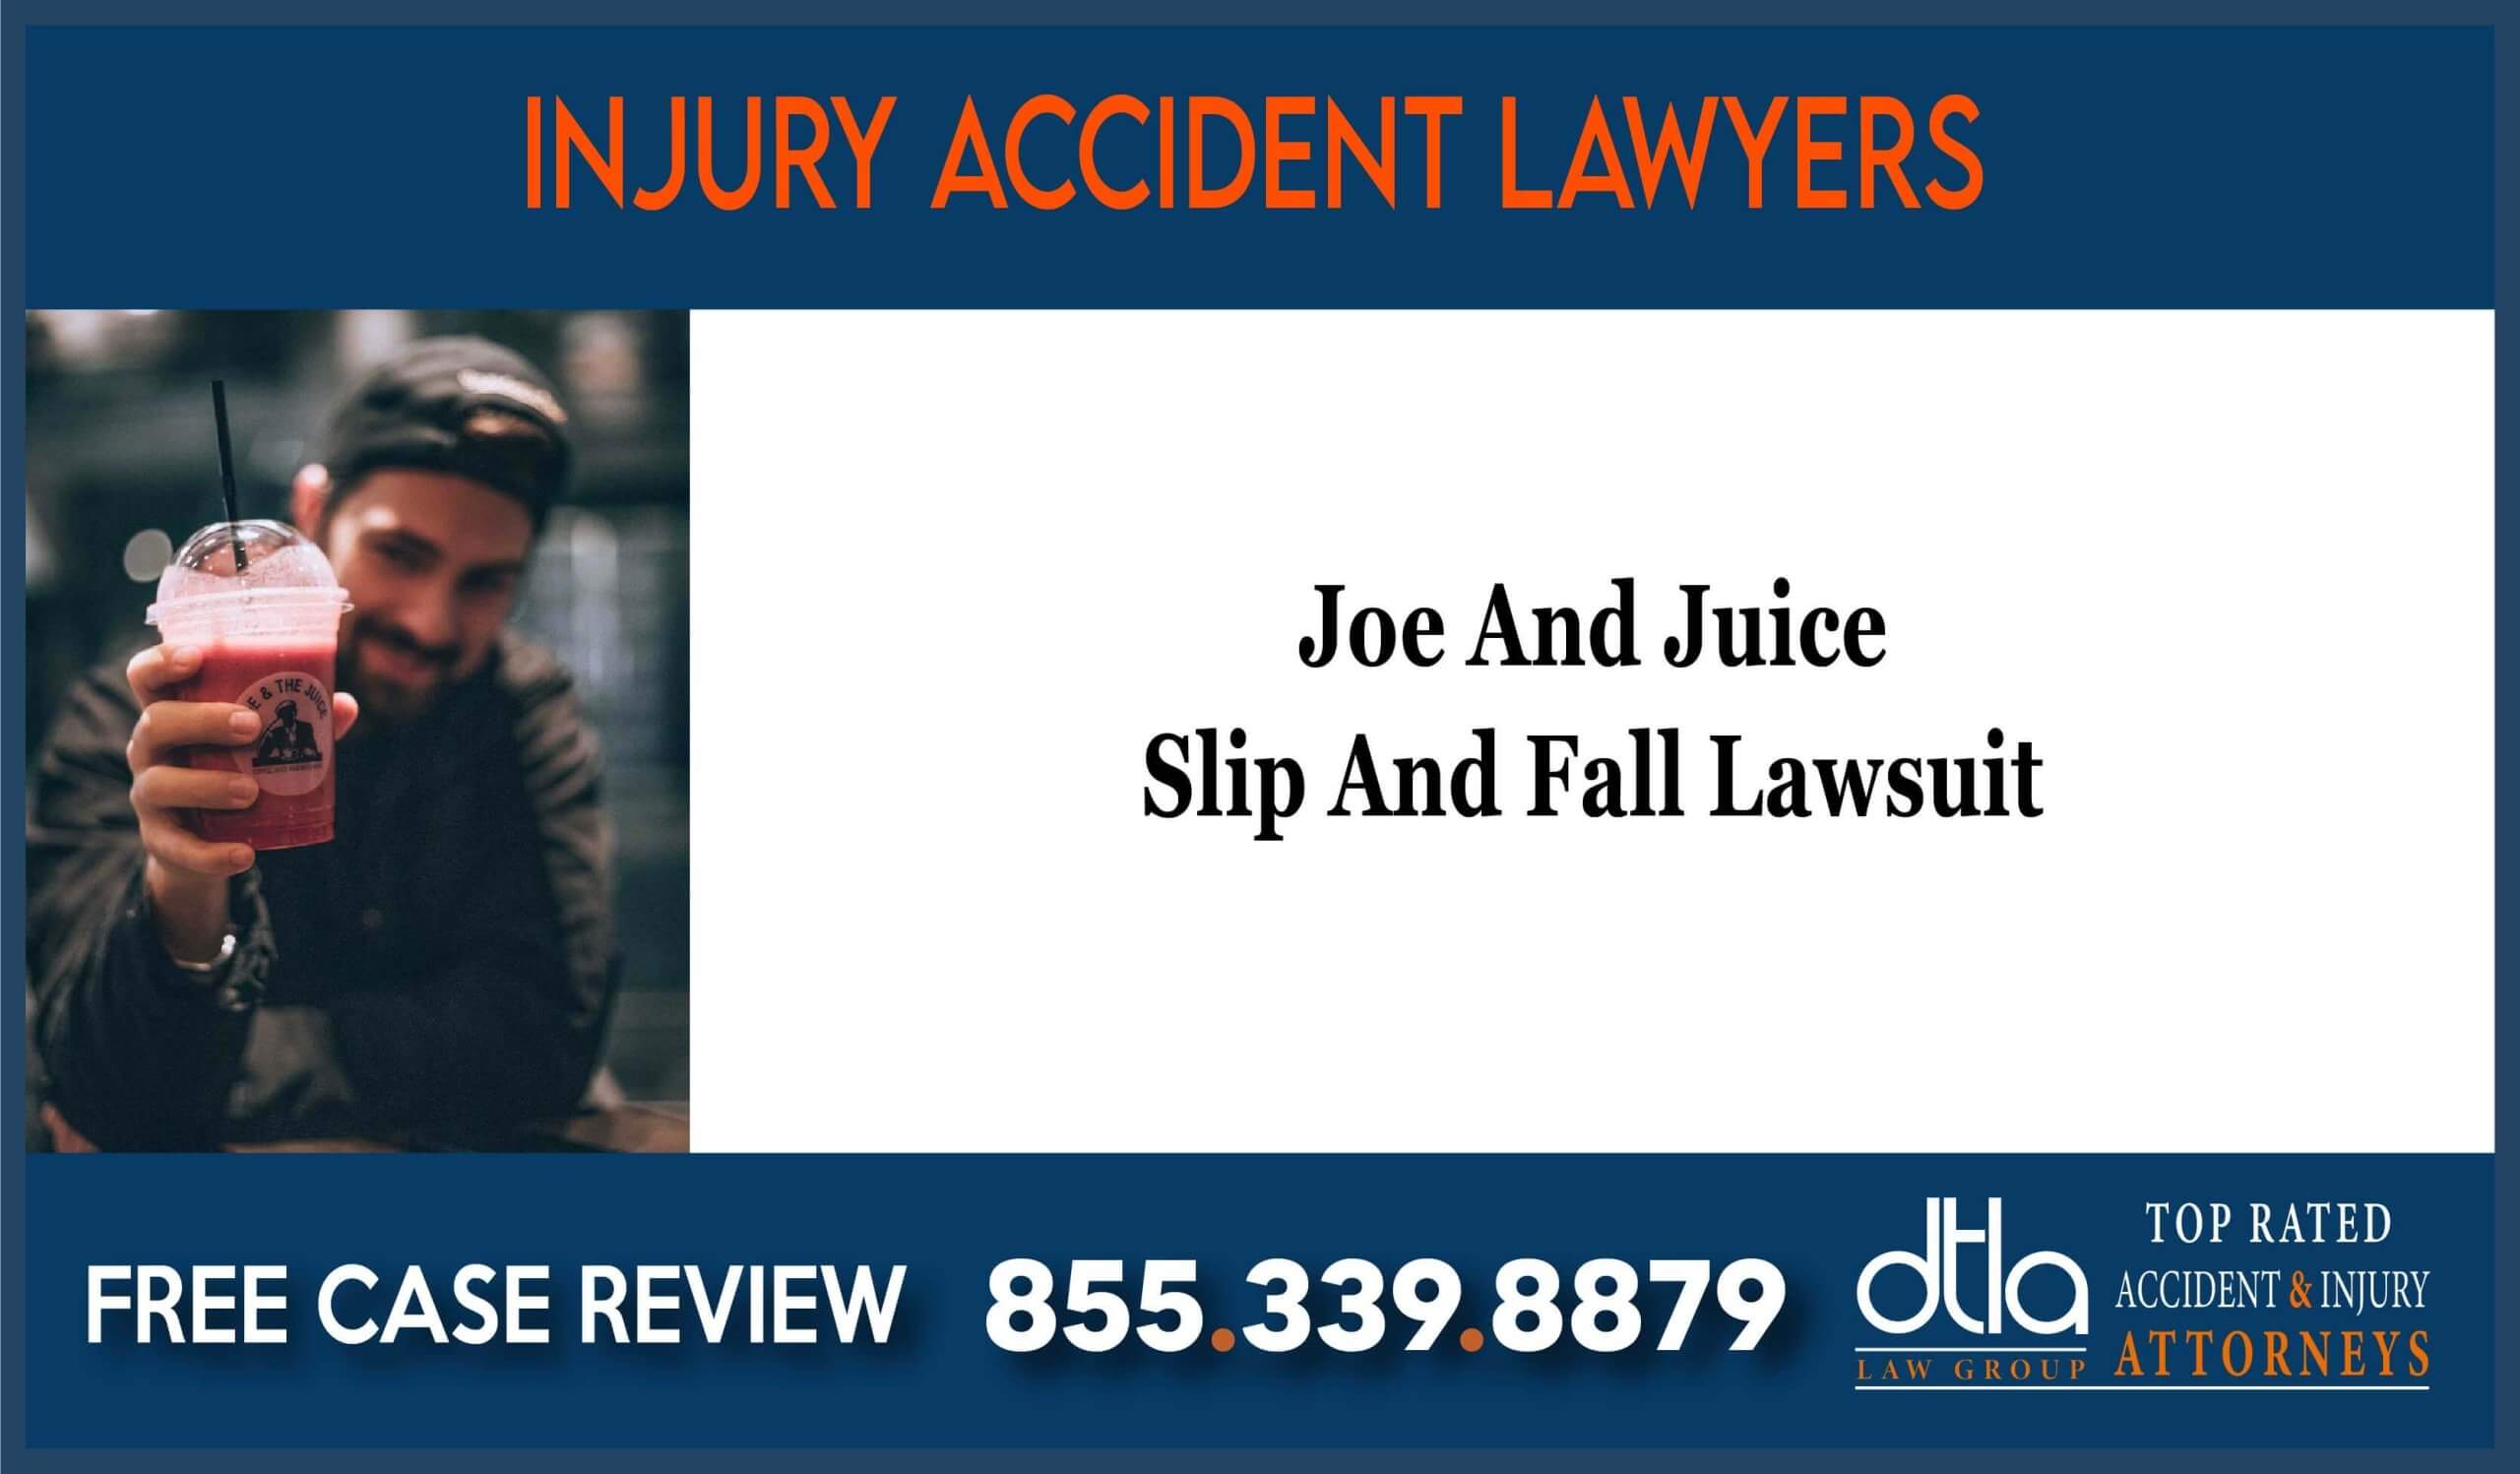 Joe And Juice Slip And Fall Attorney Lawyer Attorney Lawsuit incident liability lawsuit attorney sue